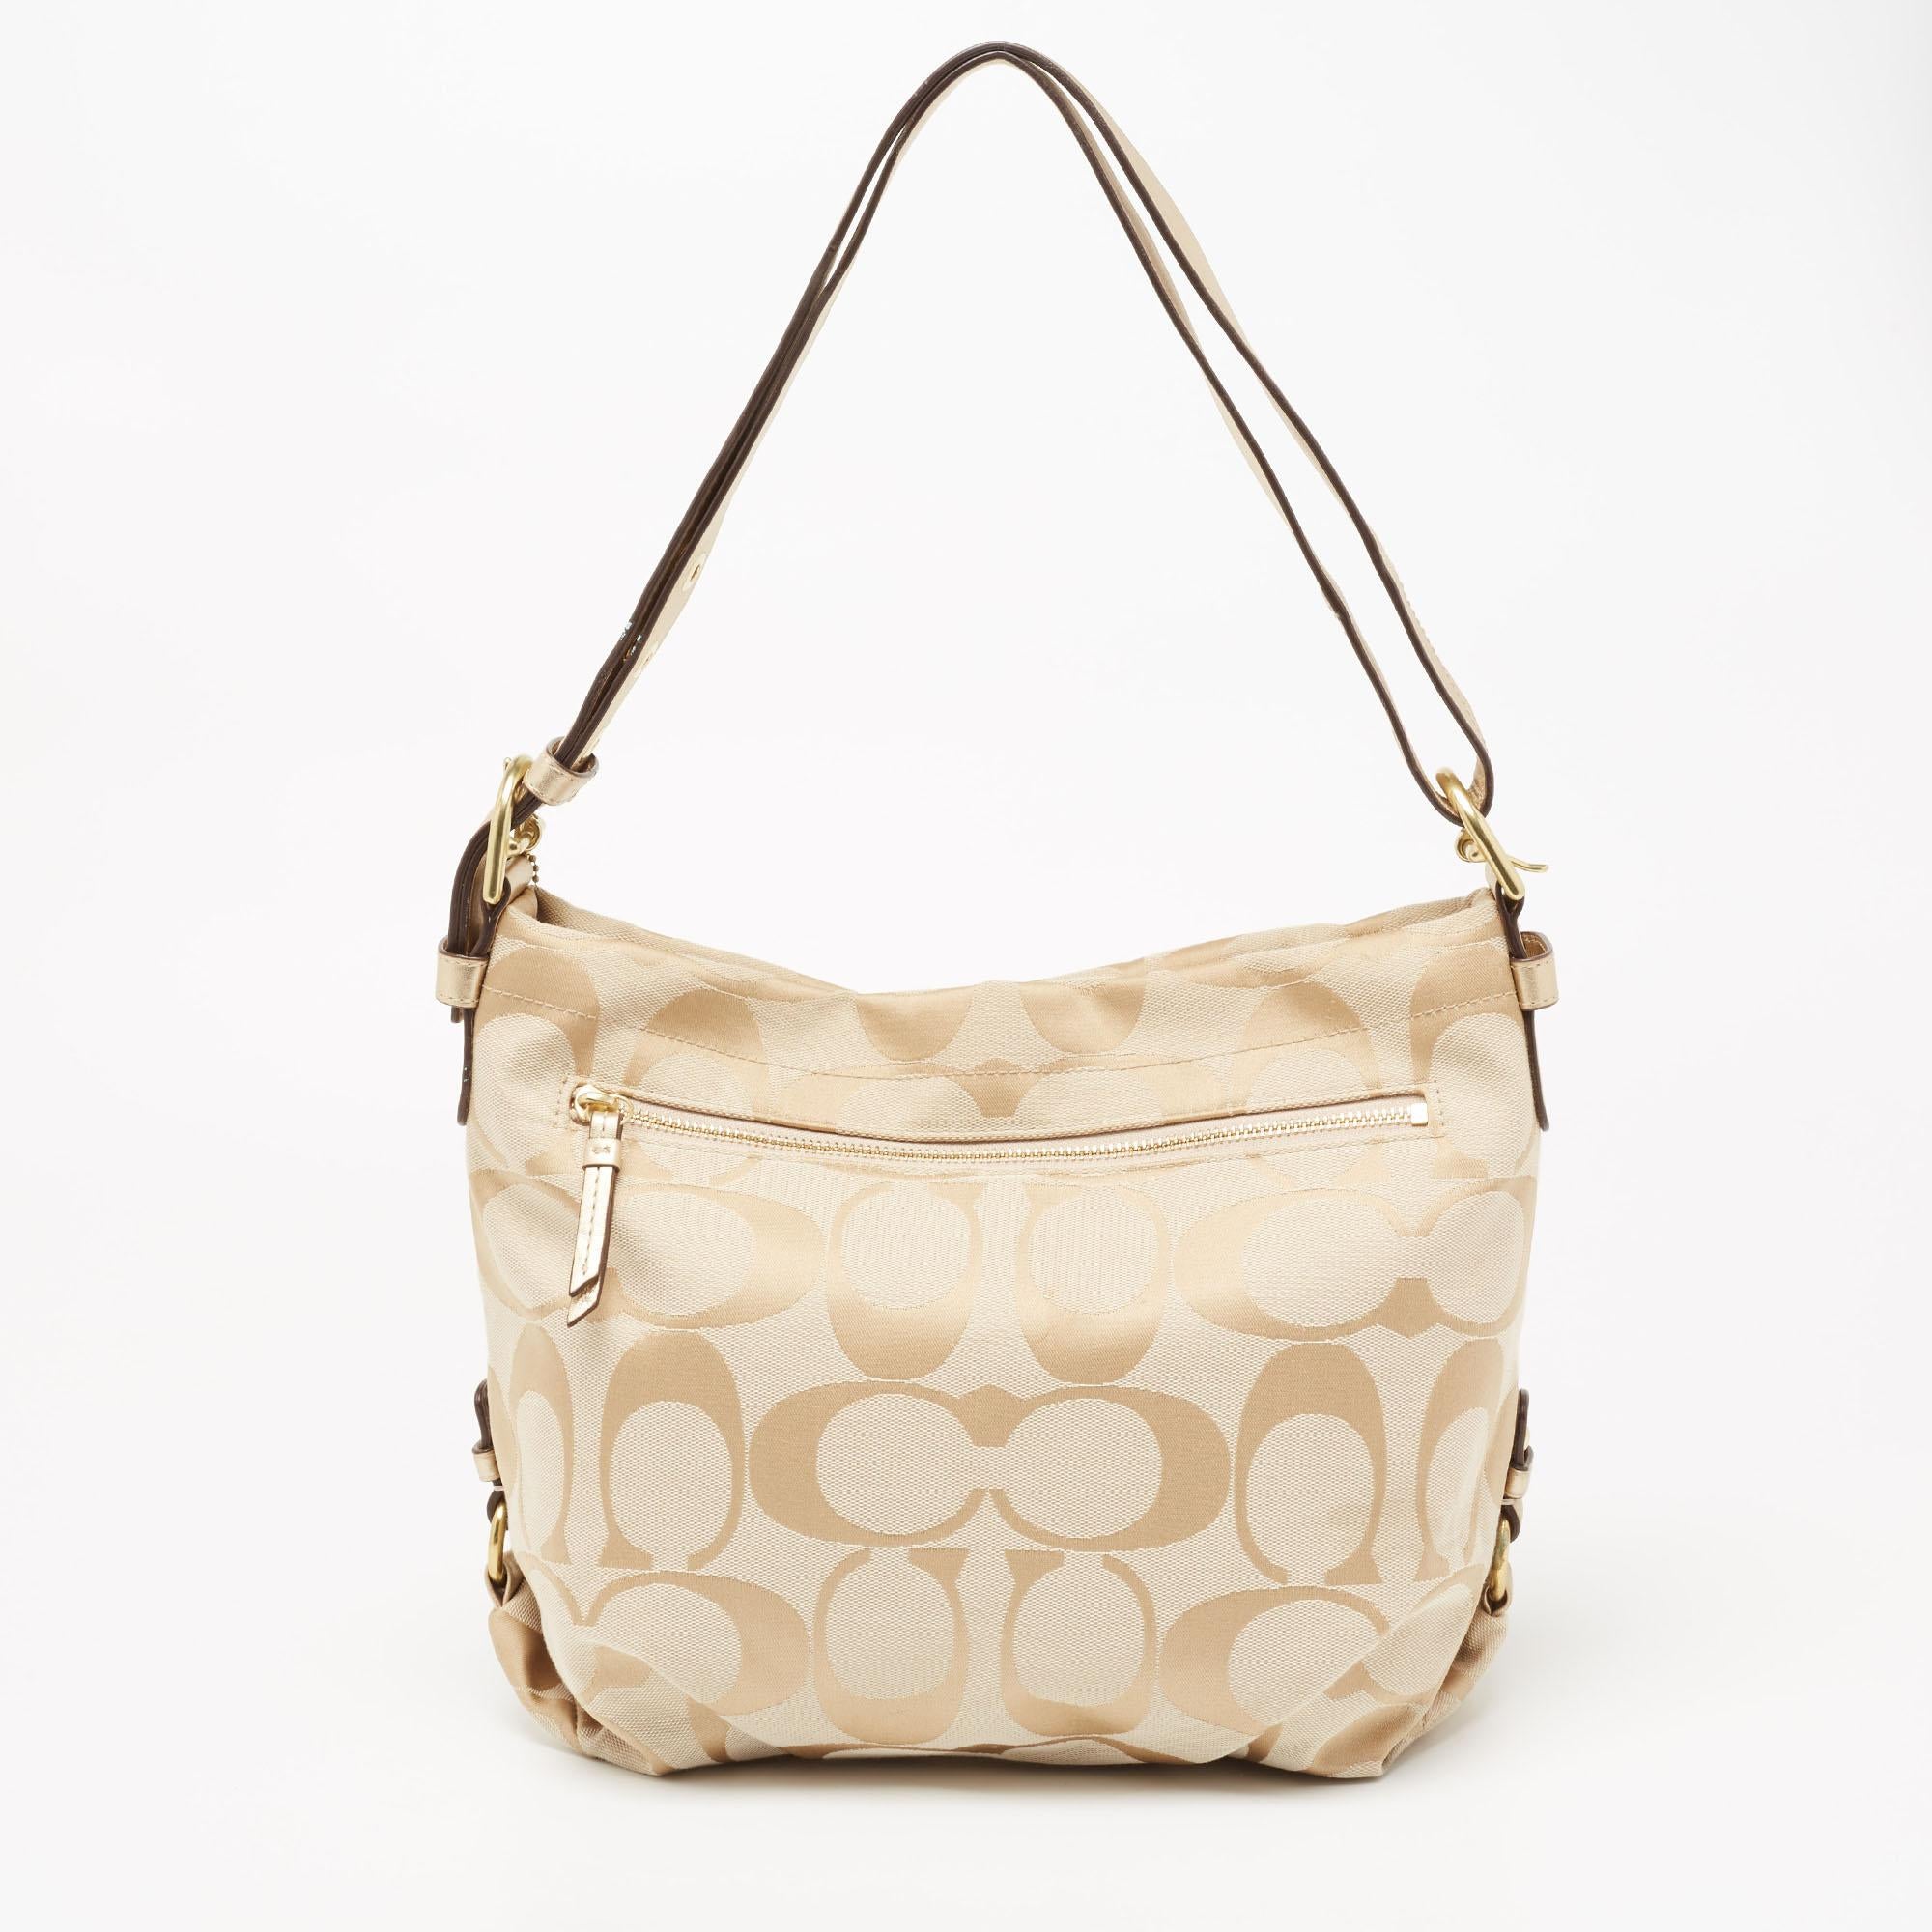 Add this elegant hobo from Coach to your collection. Crafted from signature canvas, the bag is enhanced with leather trims and gold-tone hardware. It is further equipped with a single adjustable handle and a fabric-lined interior that is secured by